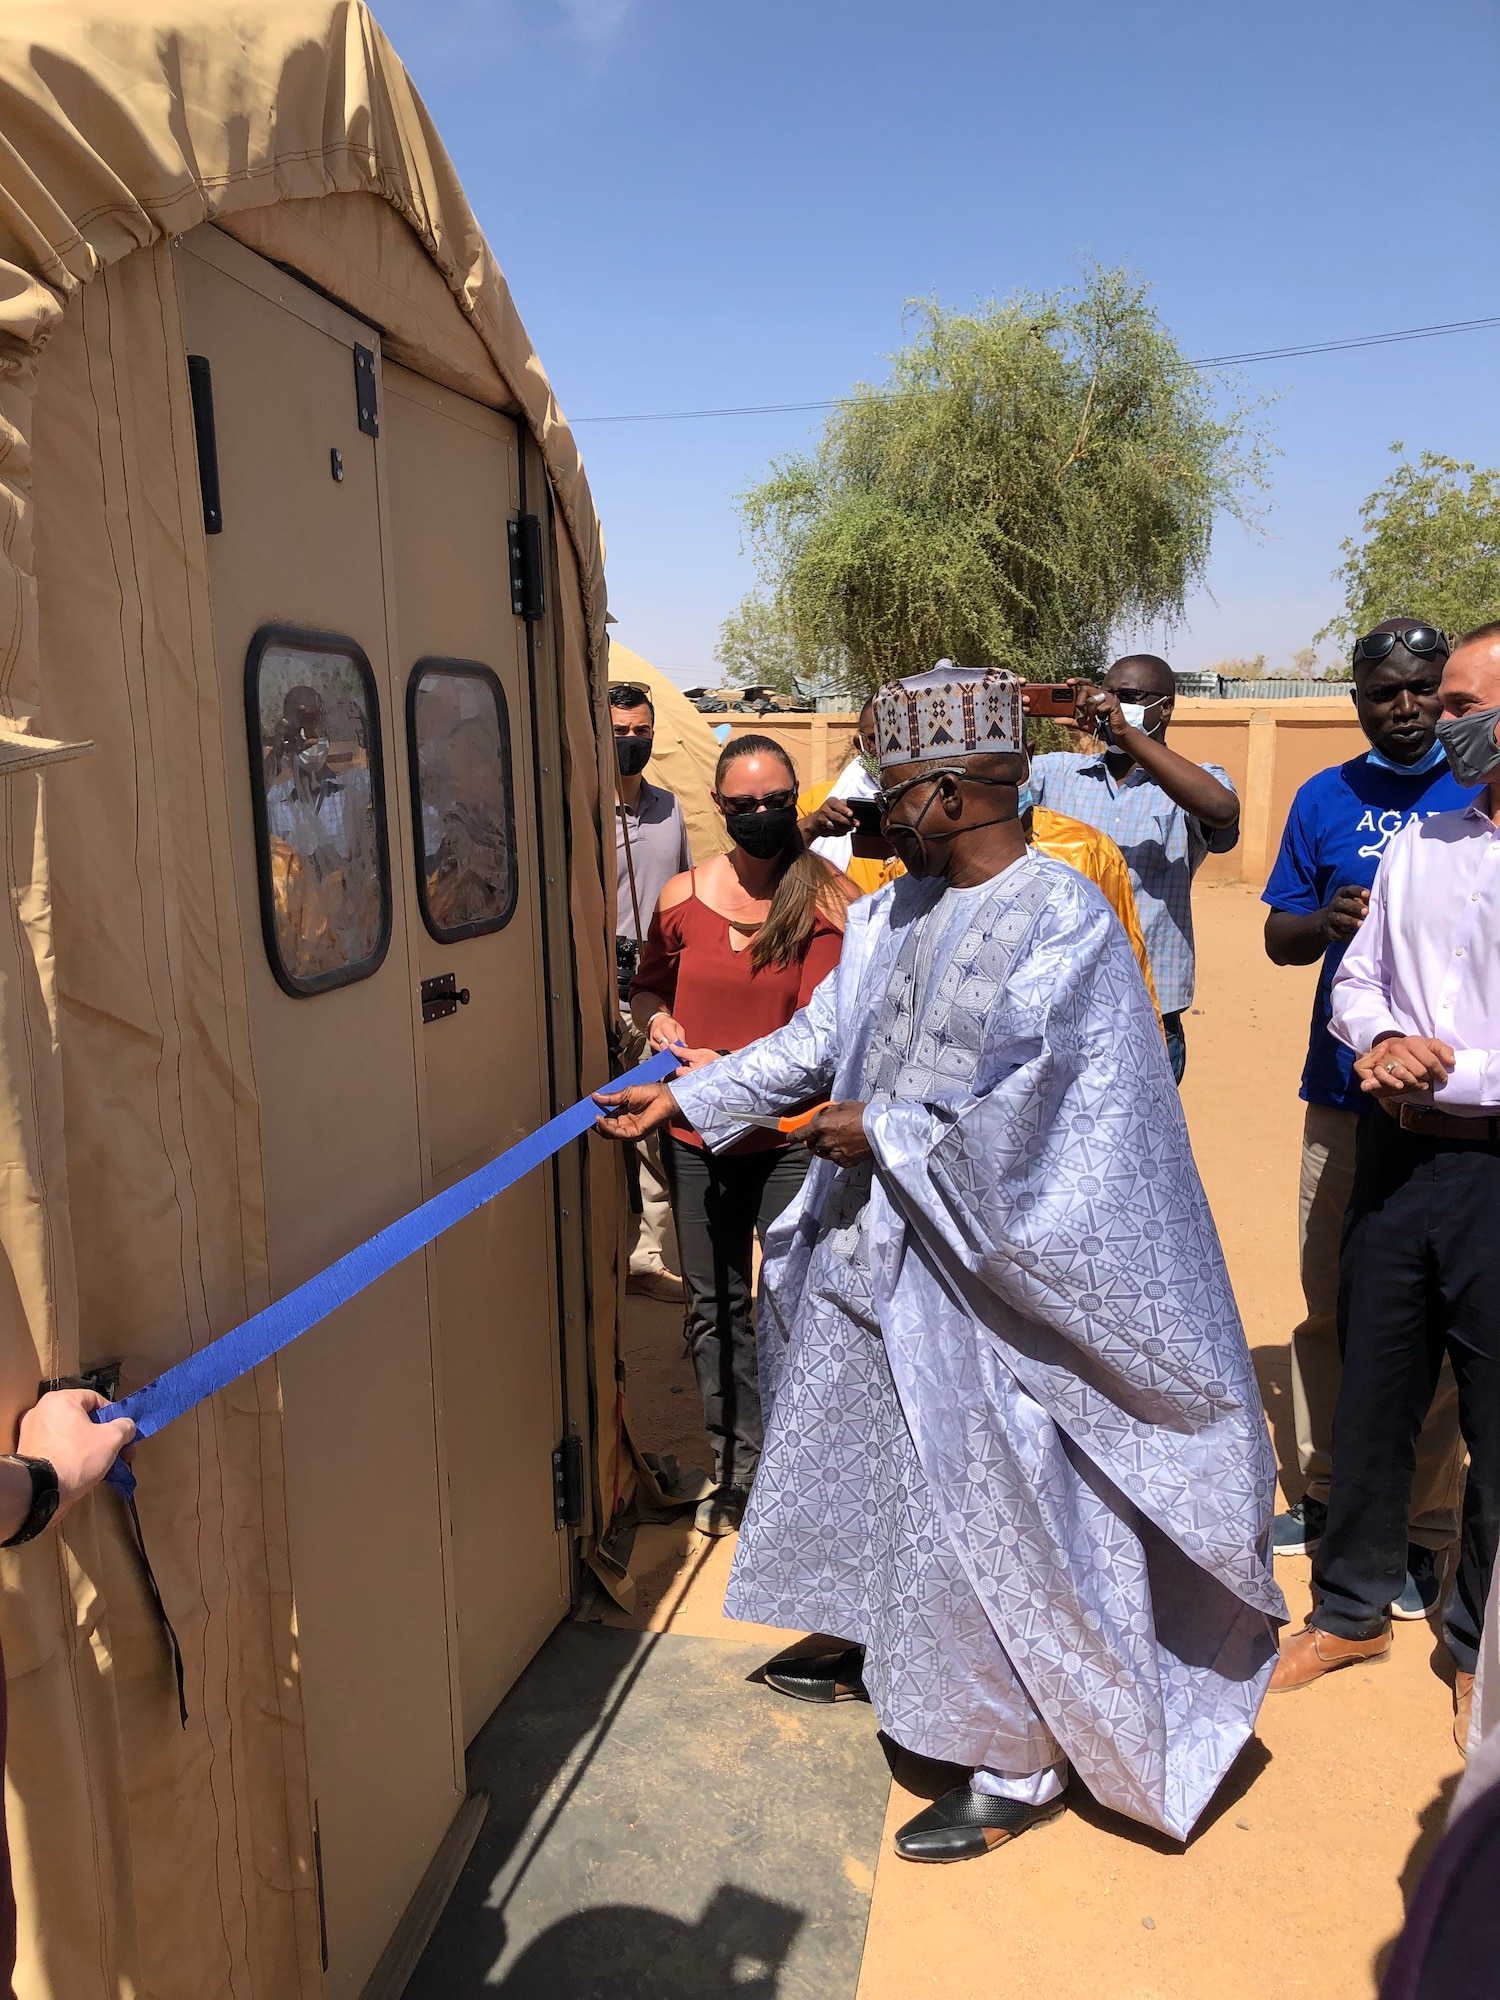 Mr. Magagi Maman Dada, Agadez Regional Governor, cuts a ceremonial ribbon in front of the newly built/donated mobile field hospital in Agadez, Niger, April 4, 2022. The $1.6 million, 4,592 square-foot mobile field hospital financed by the U.S. Africa Command through the Overseas Humanitarian, Disaster Assistance, and Civic Aid program increases Agadez Regional Hospital’s capacity by an additional 30 beds, complete with the medical tools and resources to care for the 670,000-person community and surrounding areas. (U.S. Air Force courtesy photo by Capt. Keith Richards)